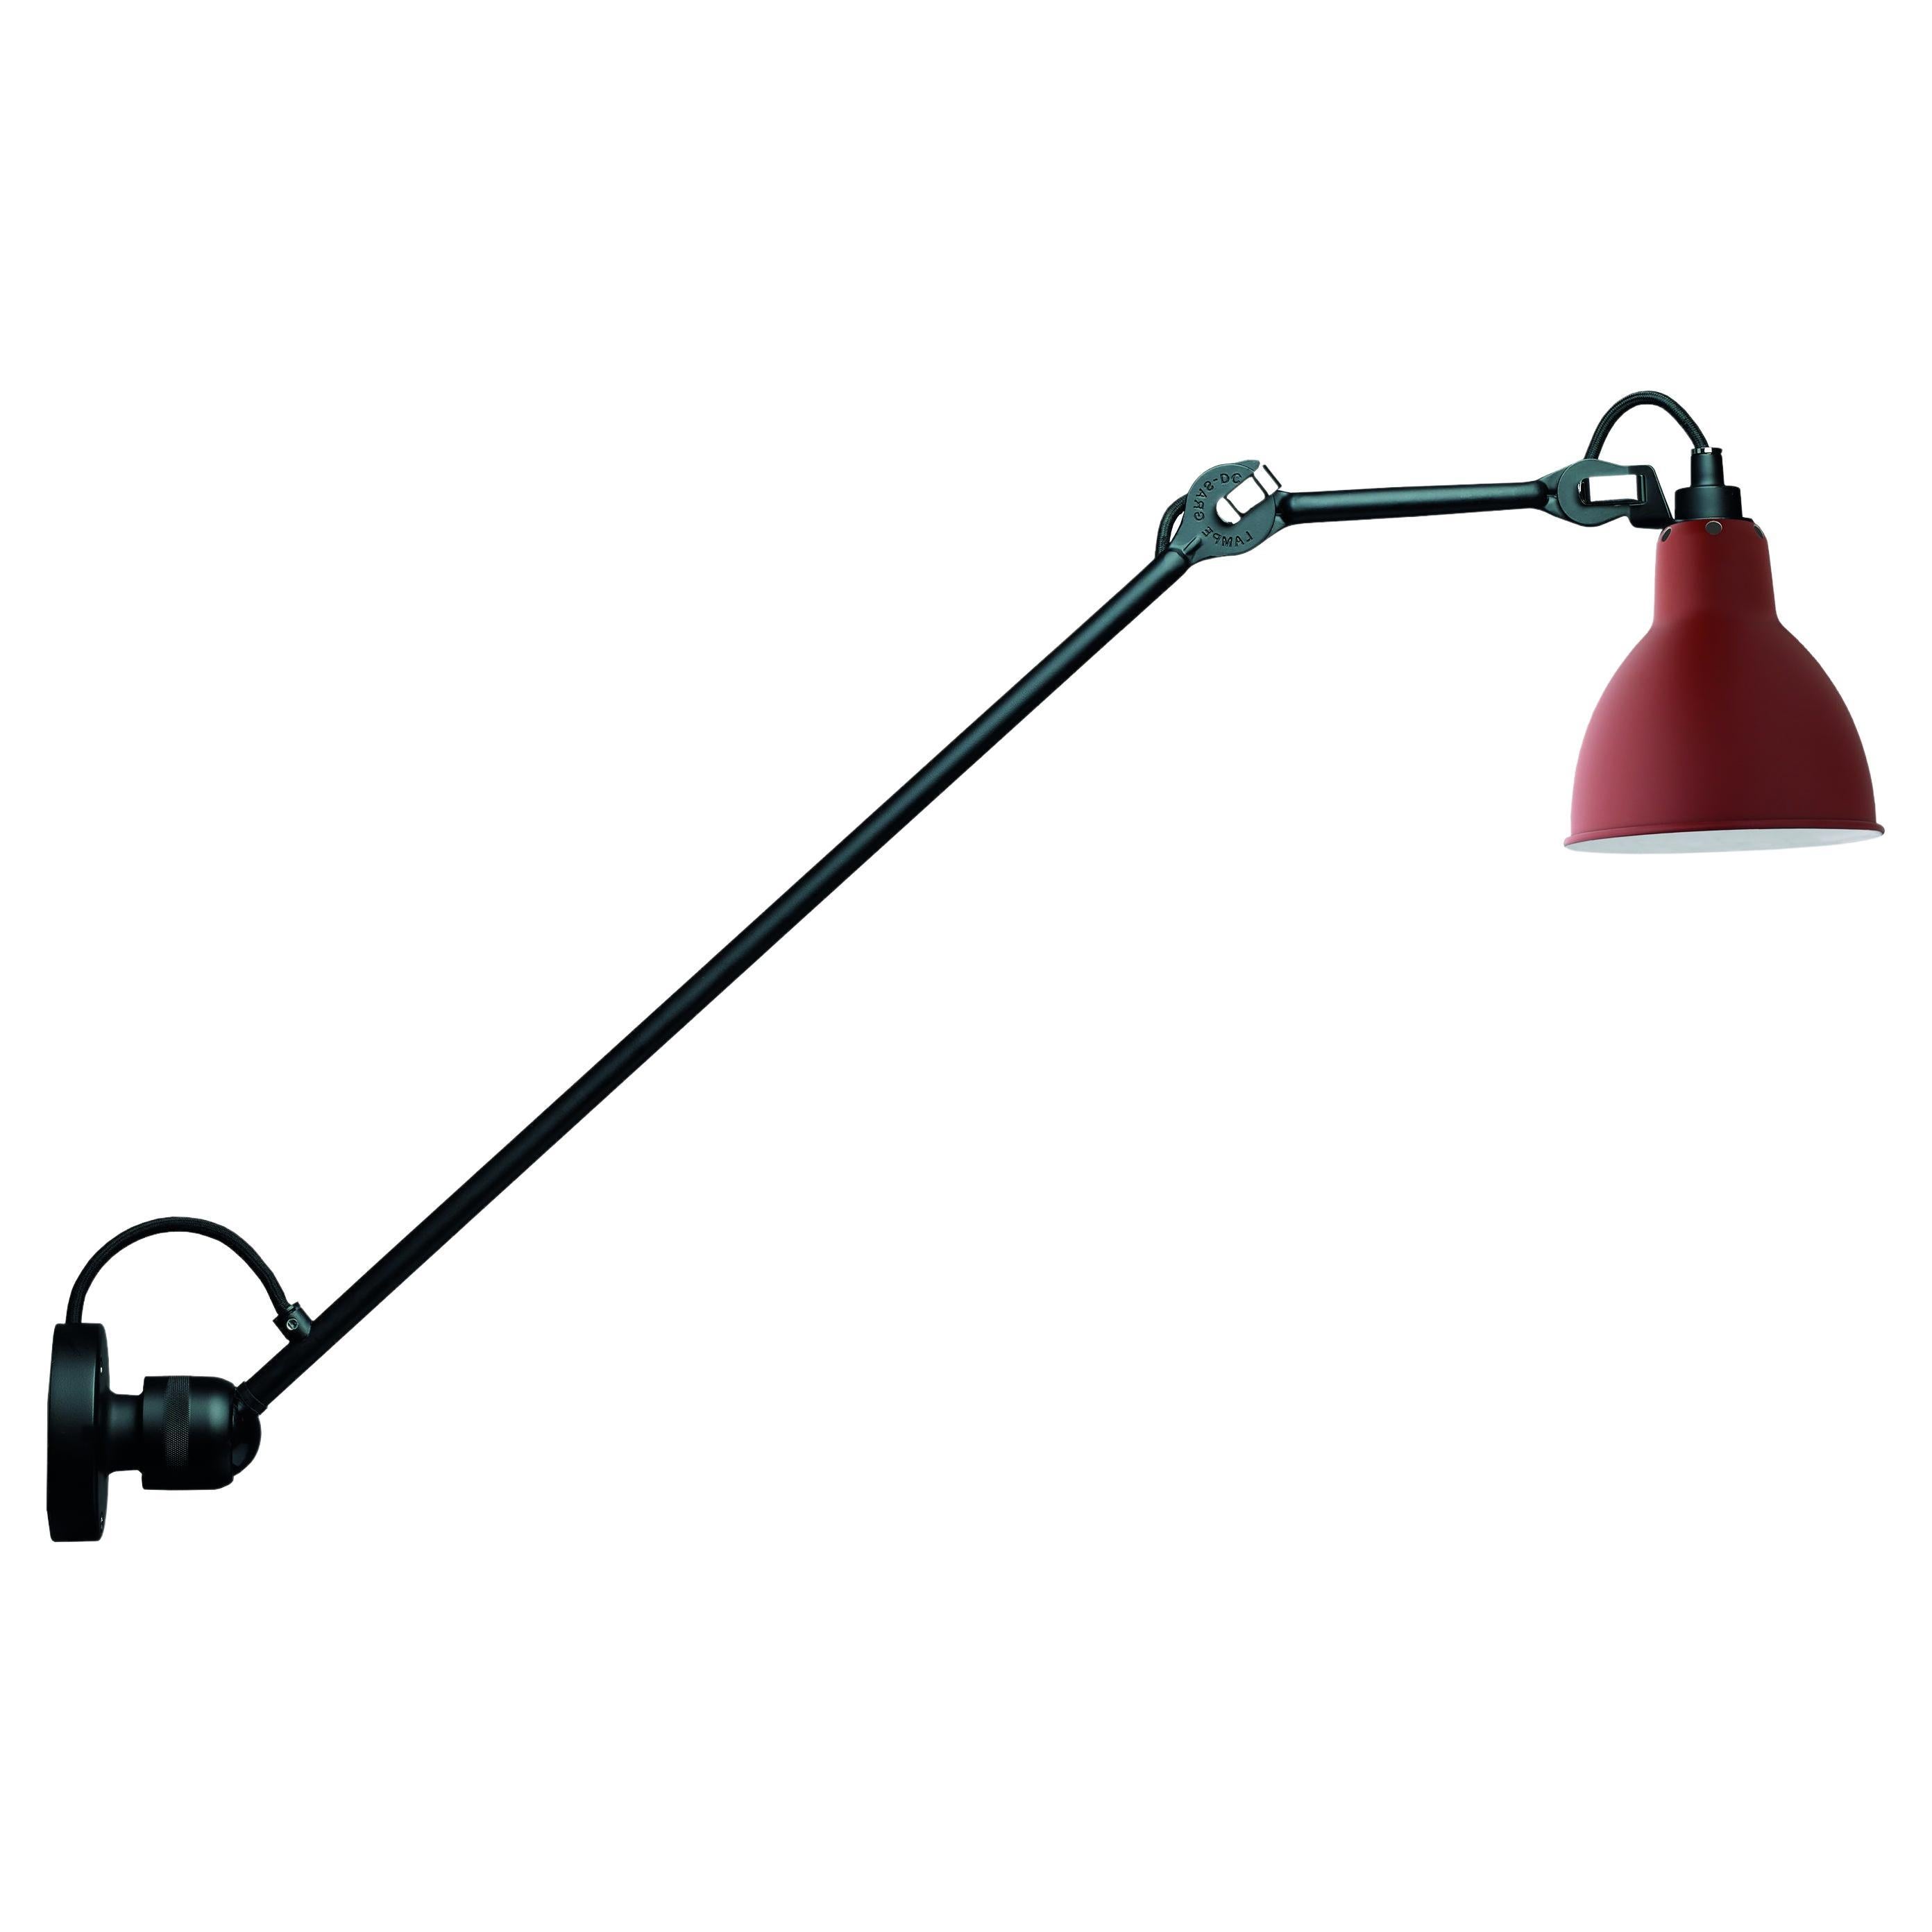 DCW Editions La Lampe Gras N°304 L60 Wall Lamp in Black Arm and Red Shade For Sale